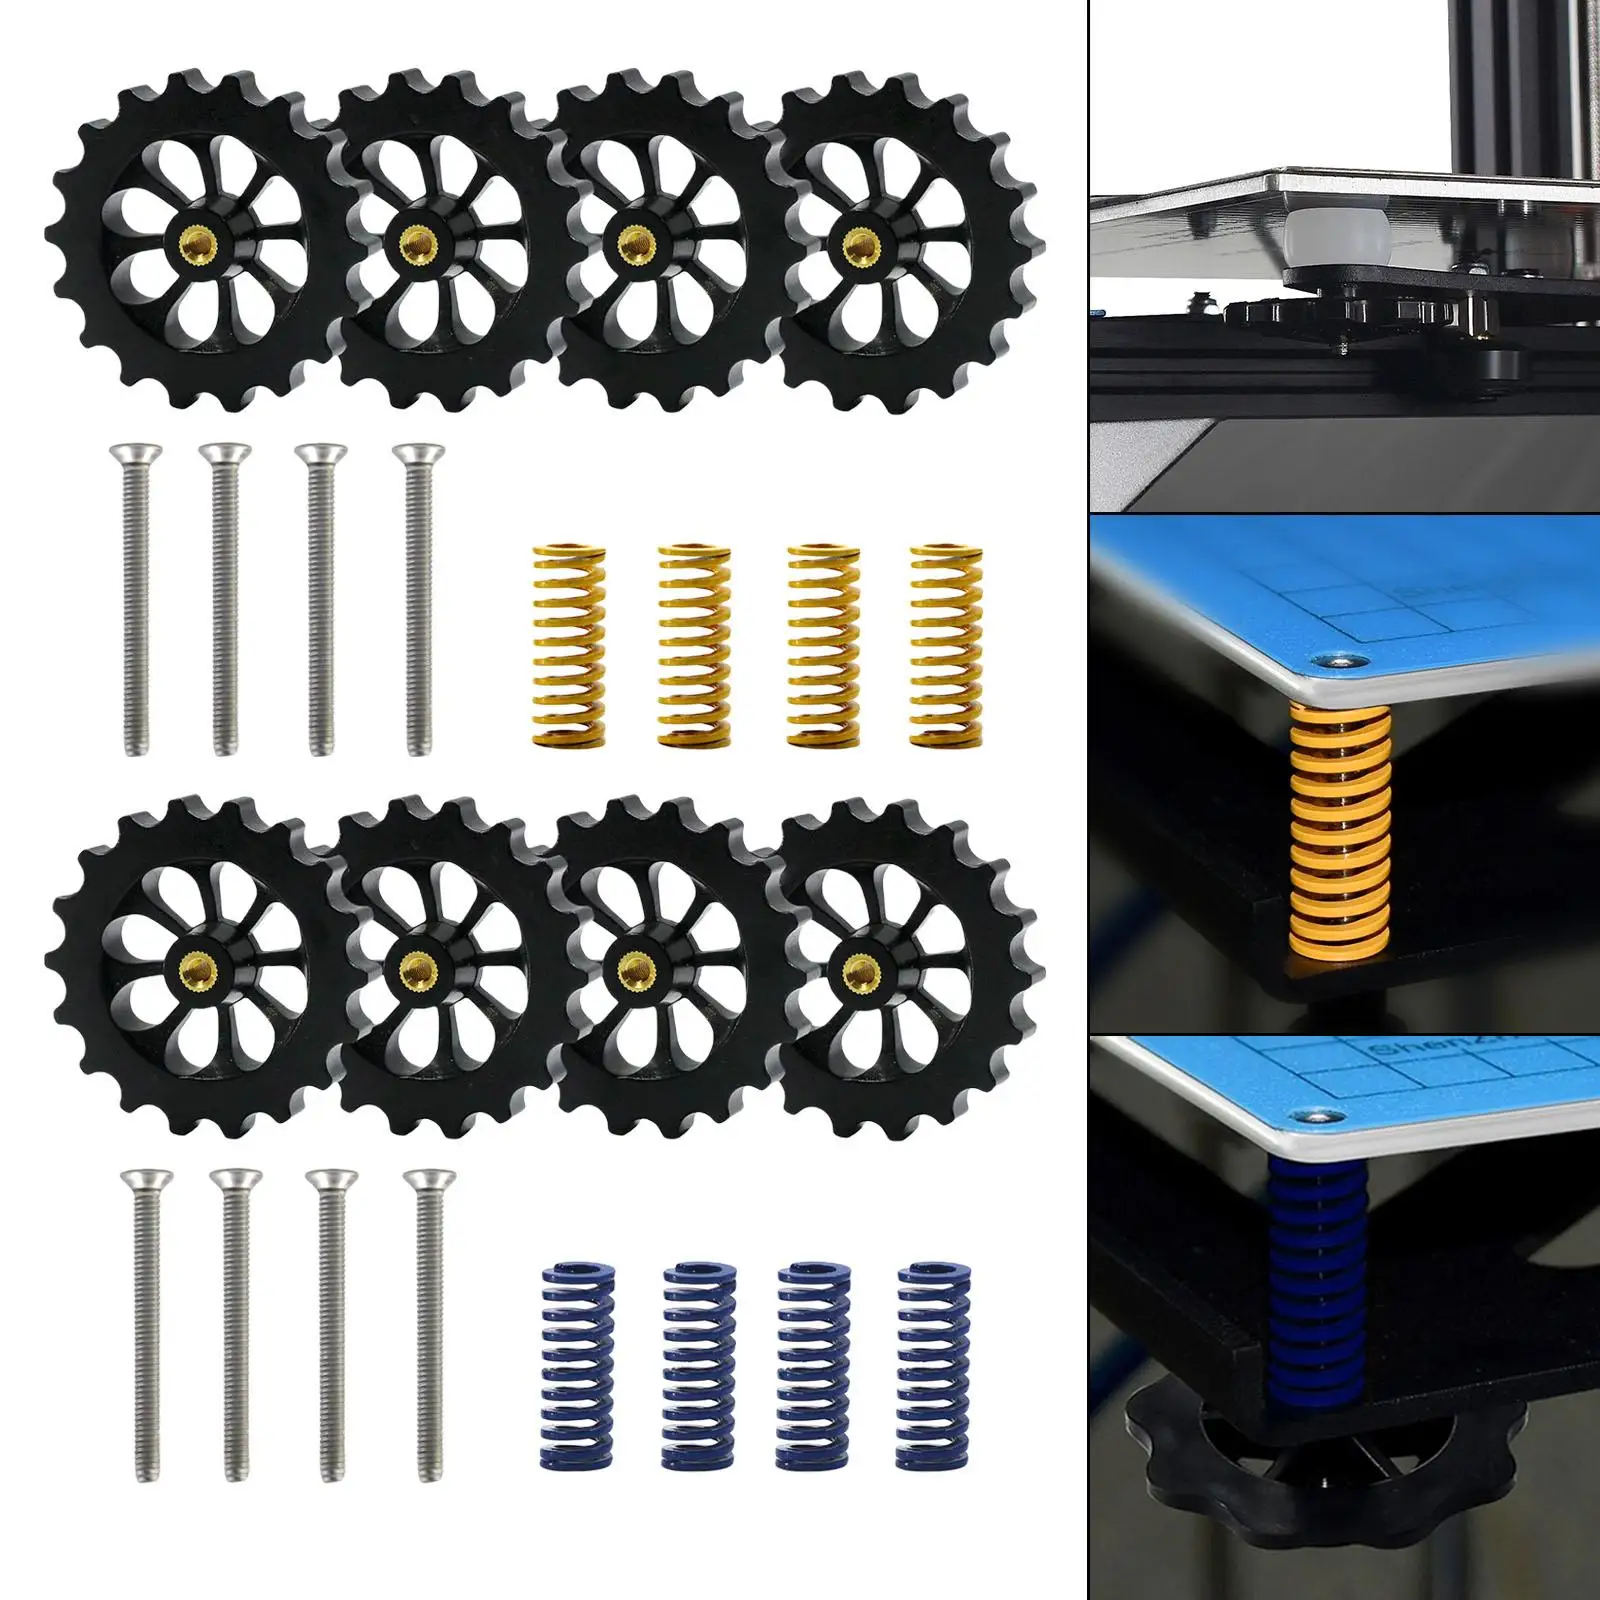 Stainless Steel Heatbed Leveling Kit M4 Screw Leveling Spring High Temperature Resistance 3D Printer Accessories